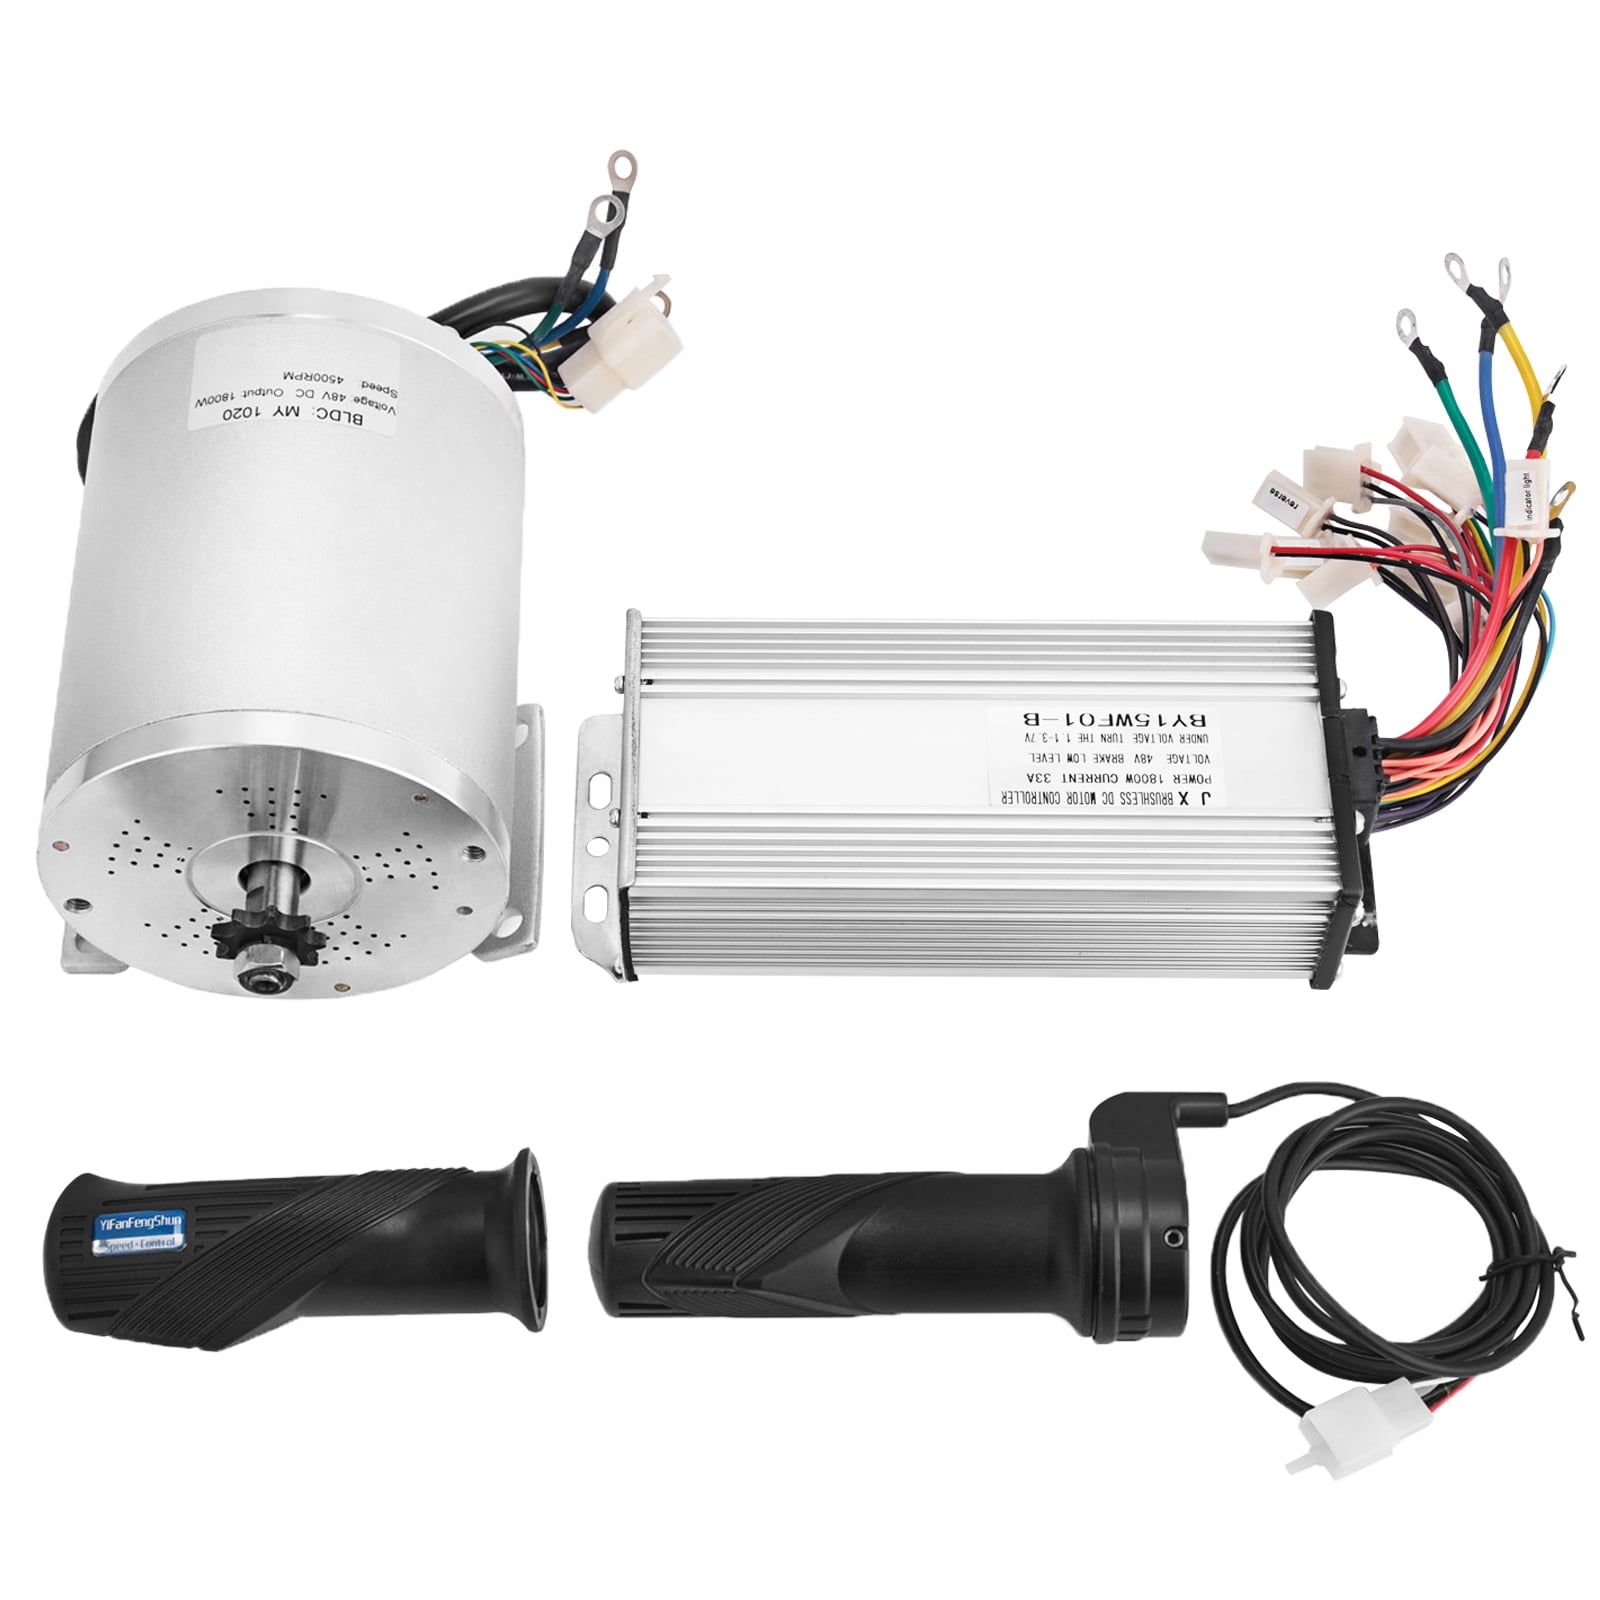 48V 1800W Controller Brushless Motor Speed Controller Box For Electric Scooter 